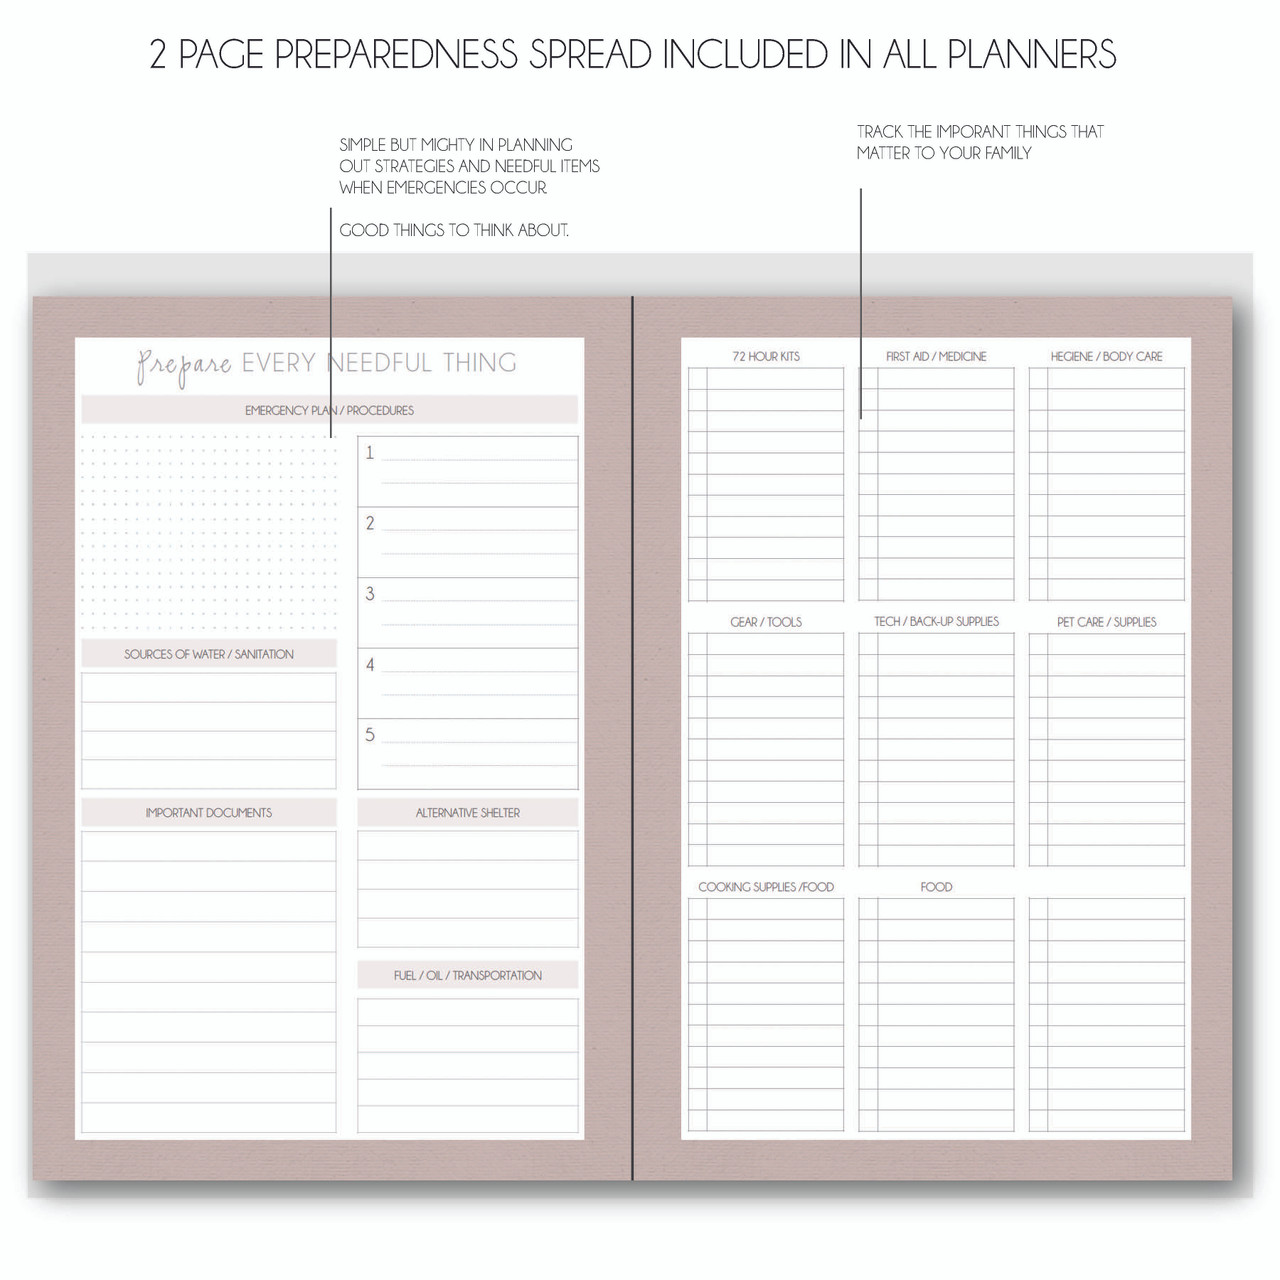 In The Leafy Treetops Agenda & Planner Bookmark | Press Forward  Inspirational Bookmark - Pink Flowers